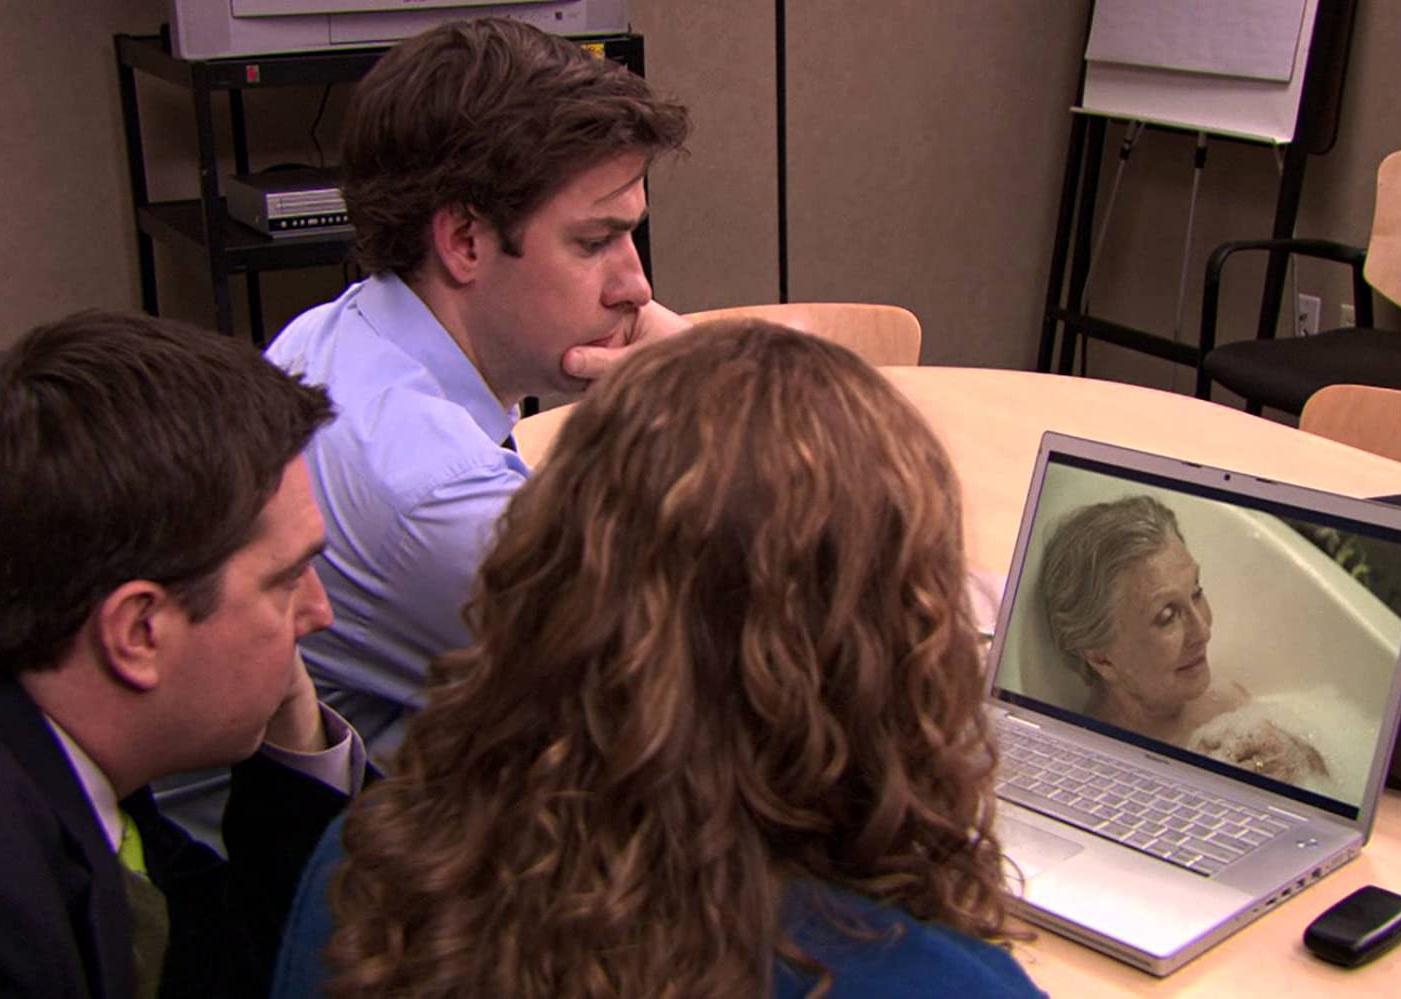 John Krasinski, Ed Helms and Jenna Fischer look at a laptop showing a video of a woman in a bubble bath.